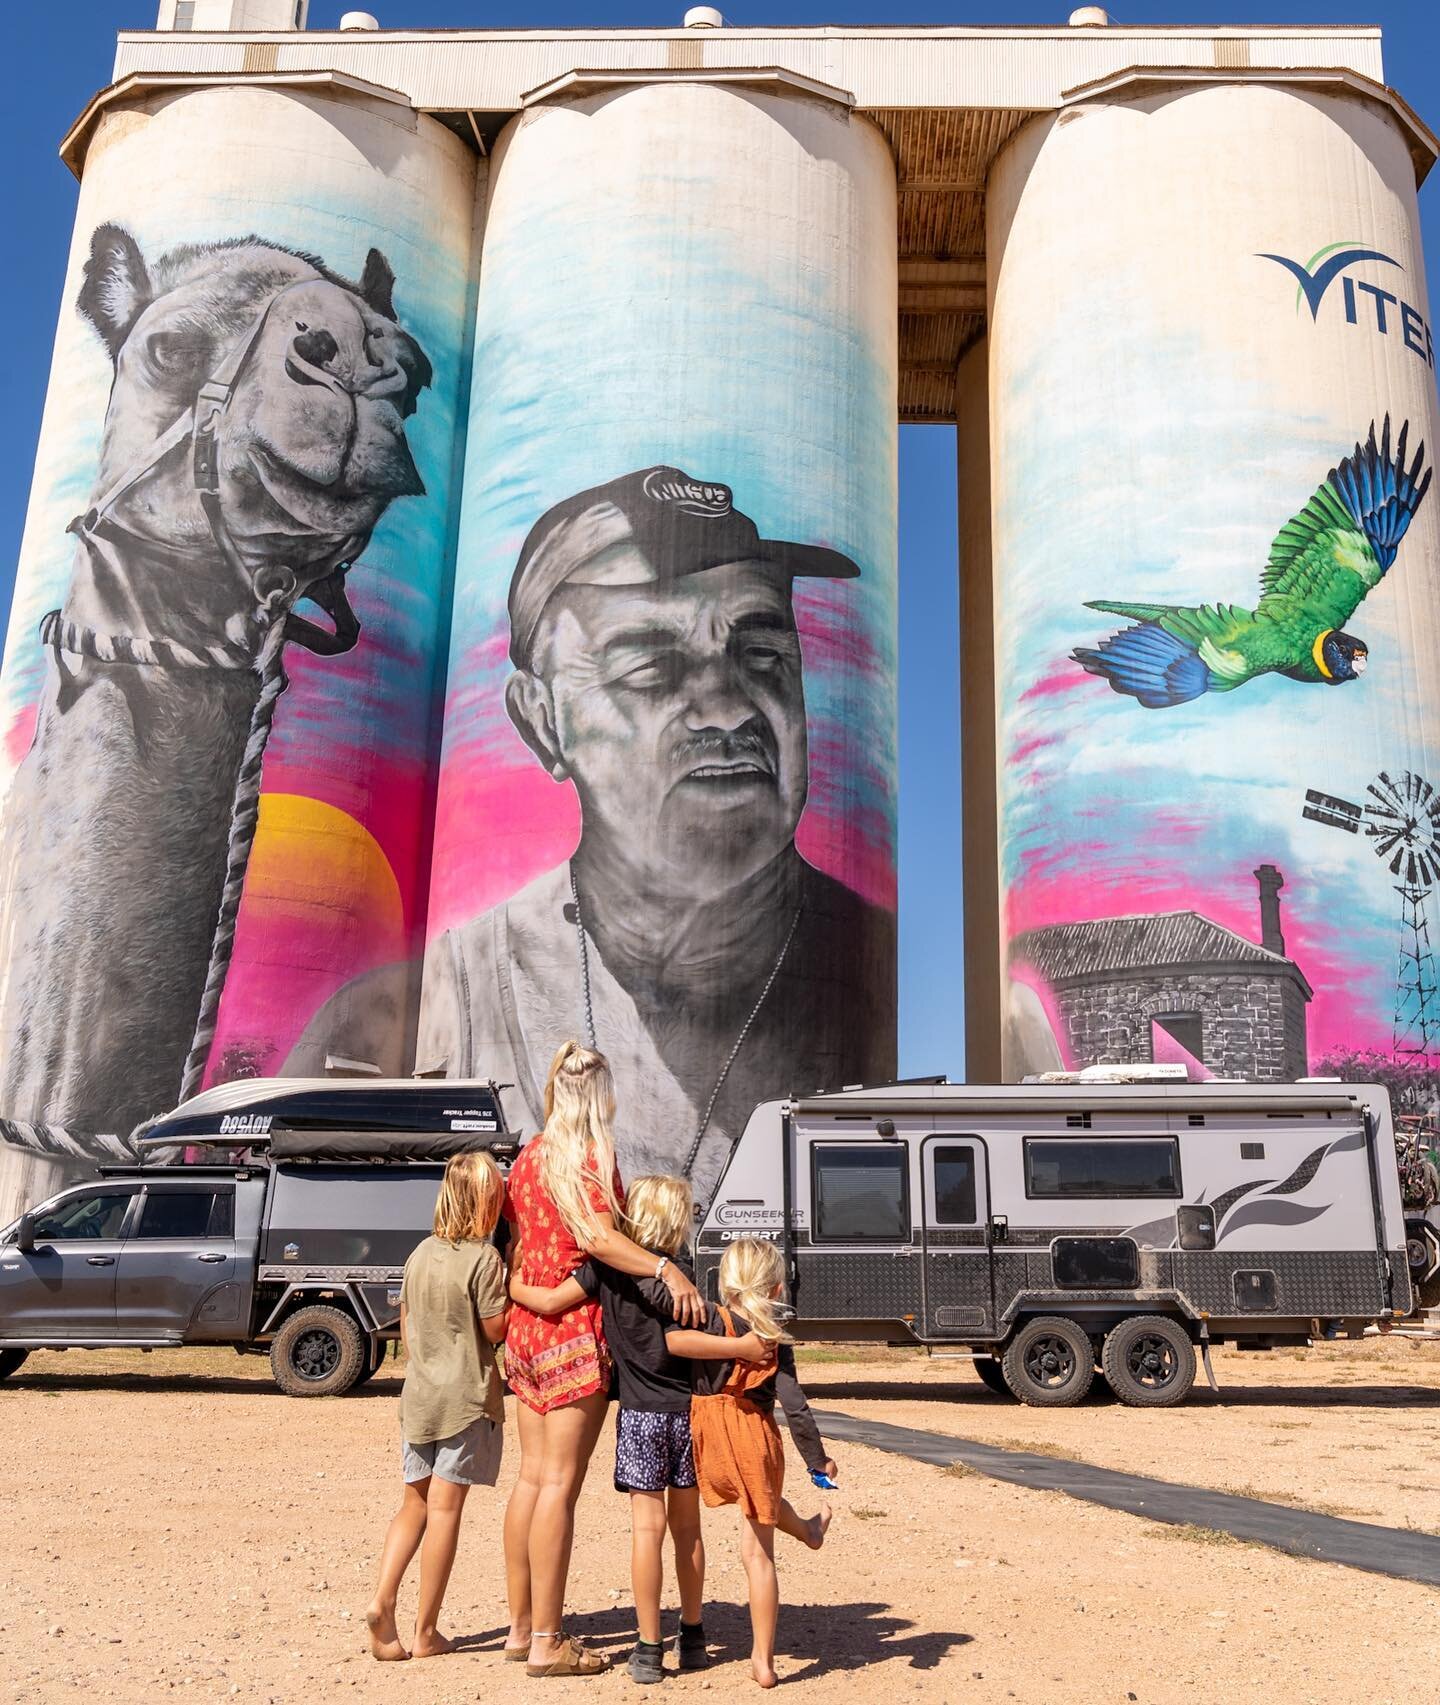 Silo Art. Have you seen it?
This beautiful bright one is on the Eyre Peninsula.
Where is the best one you&rsquo;ve seen? Let us know? cause we wanna see it!